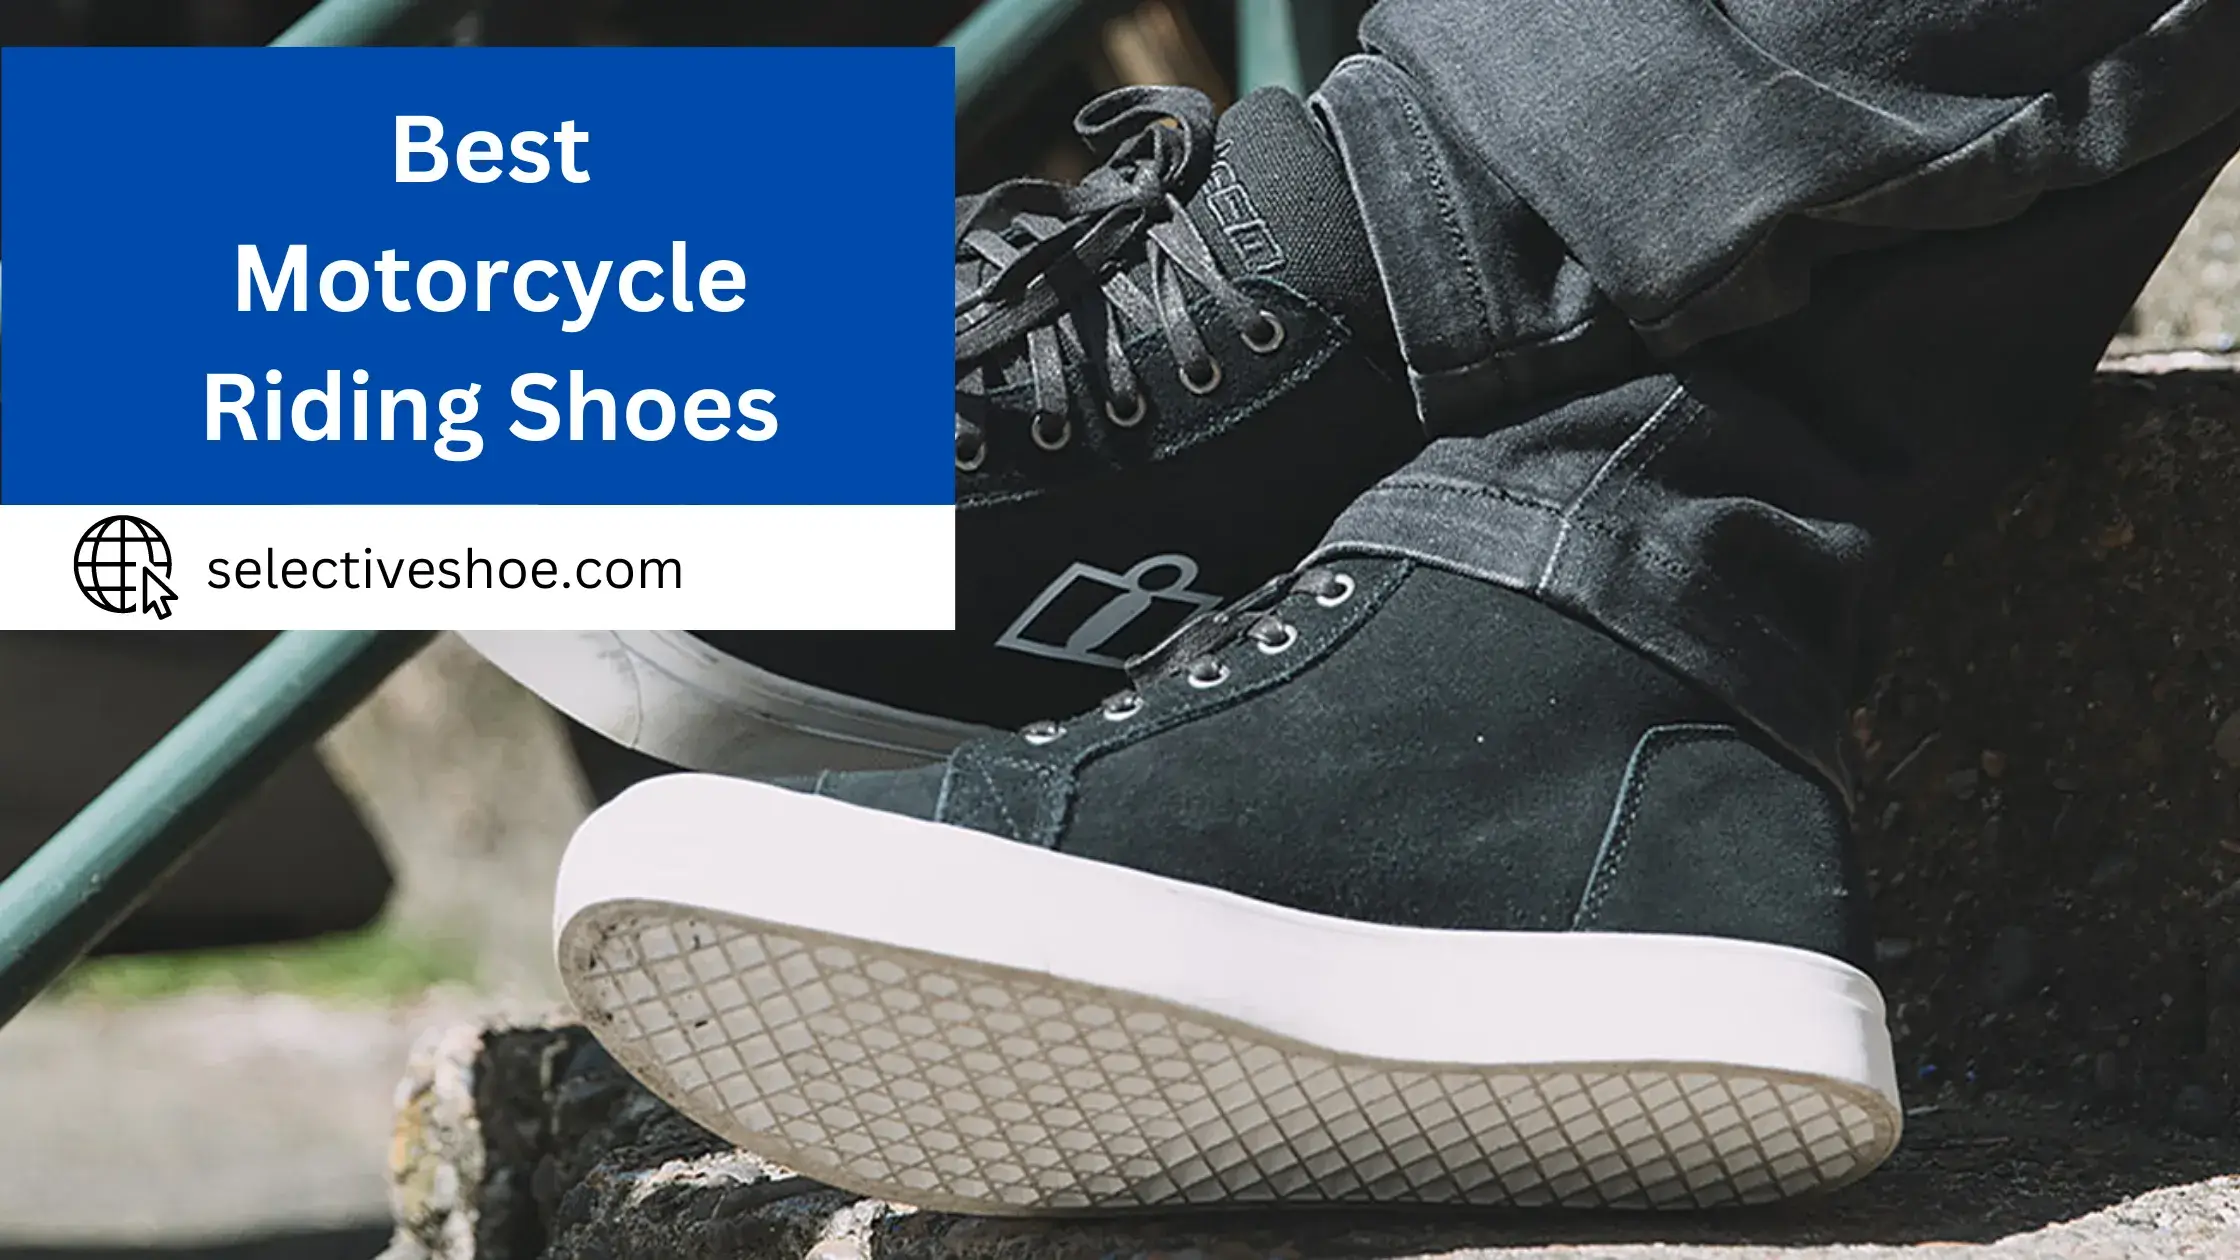 Best Motorcycle Riding Shoes - A Comprehensive Guide